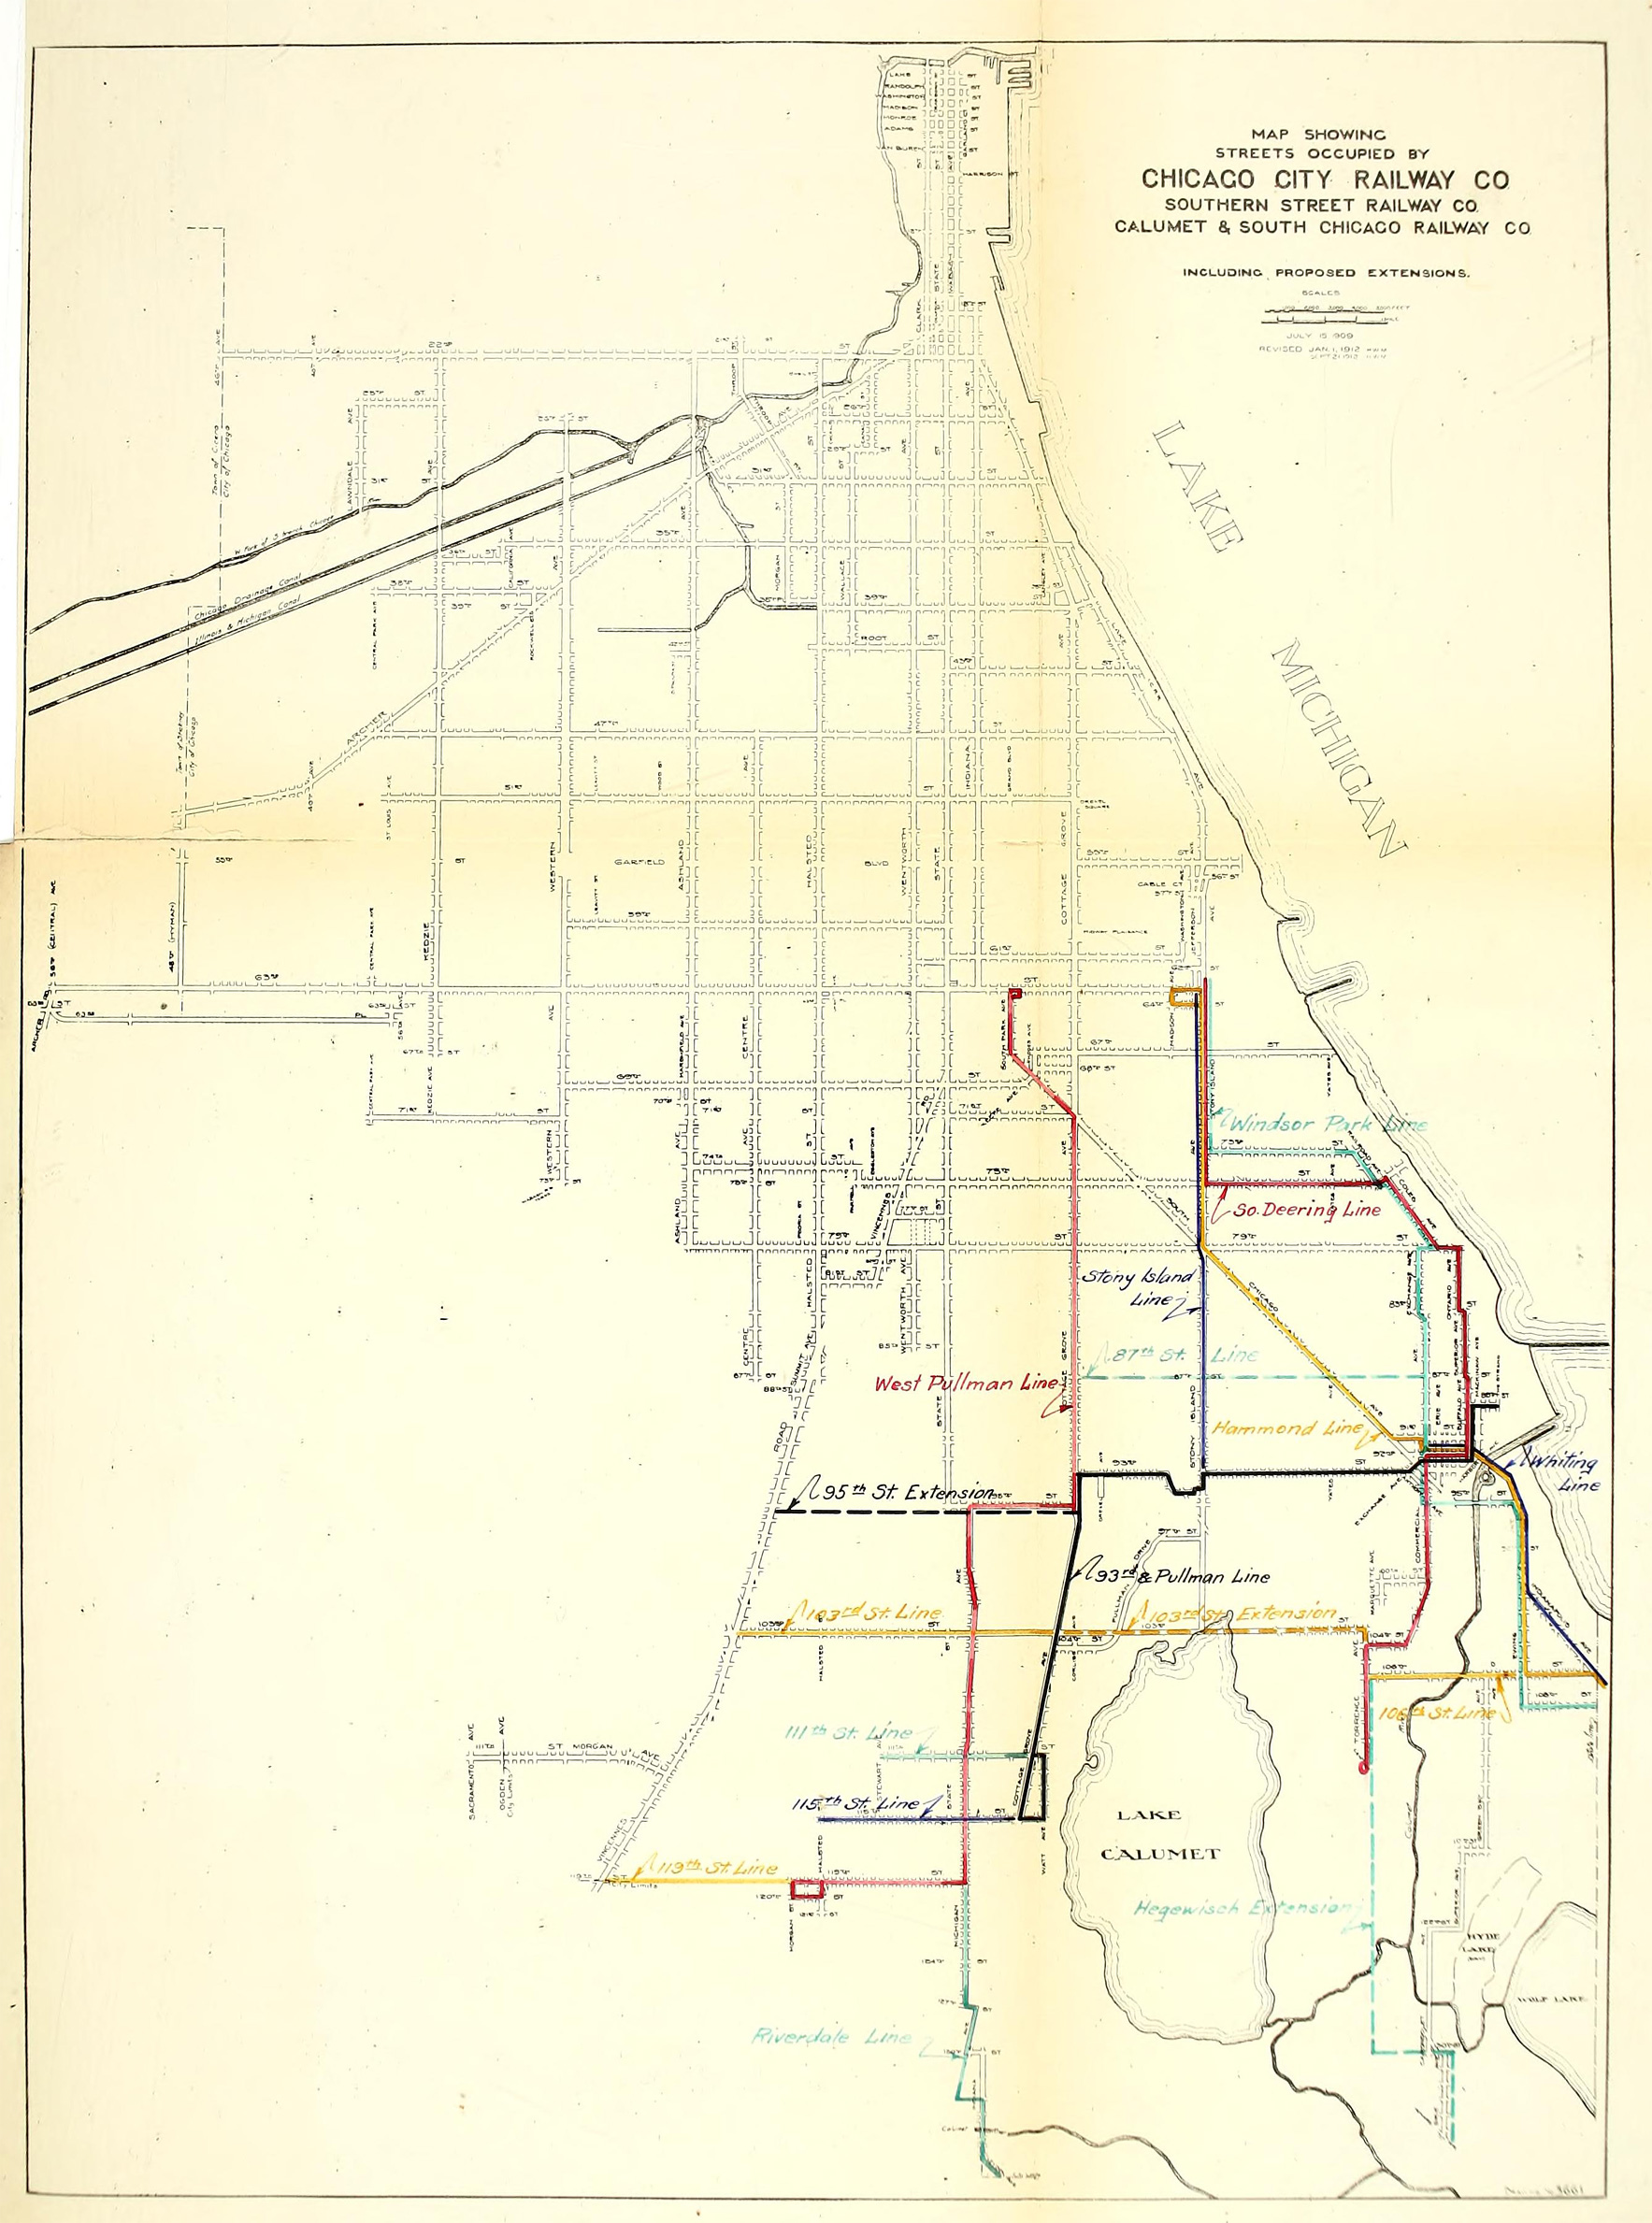 Chicago — Maps and Plans